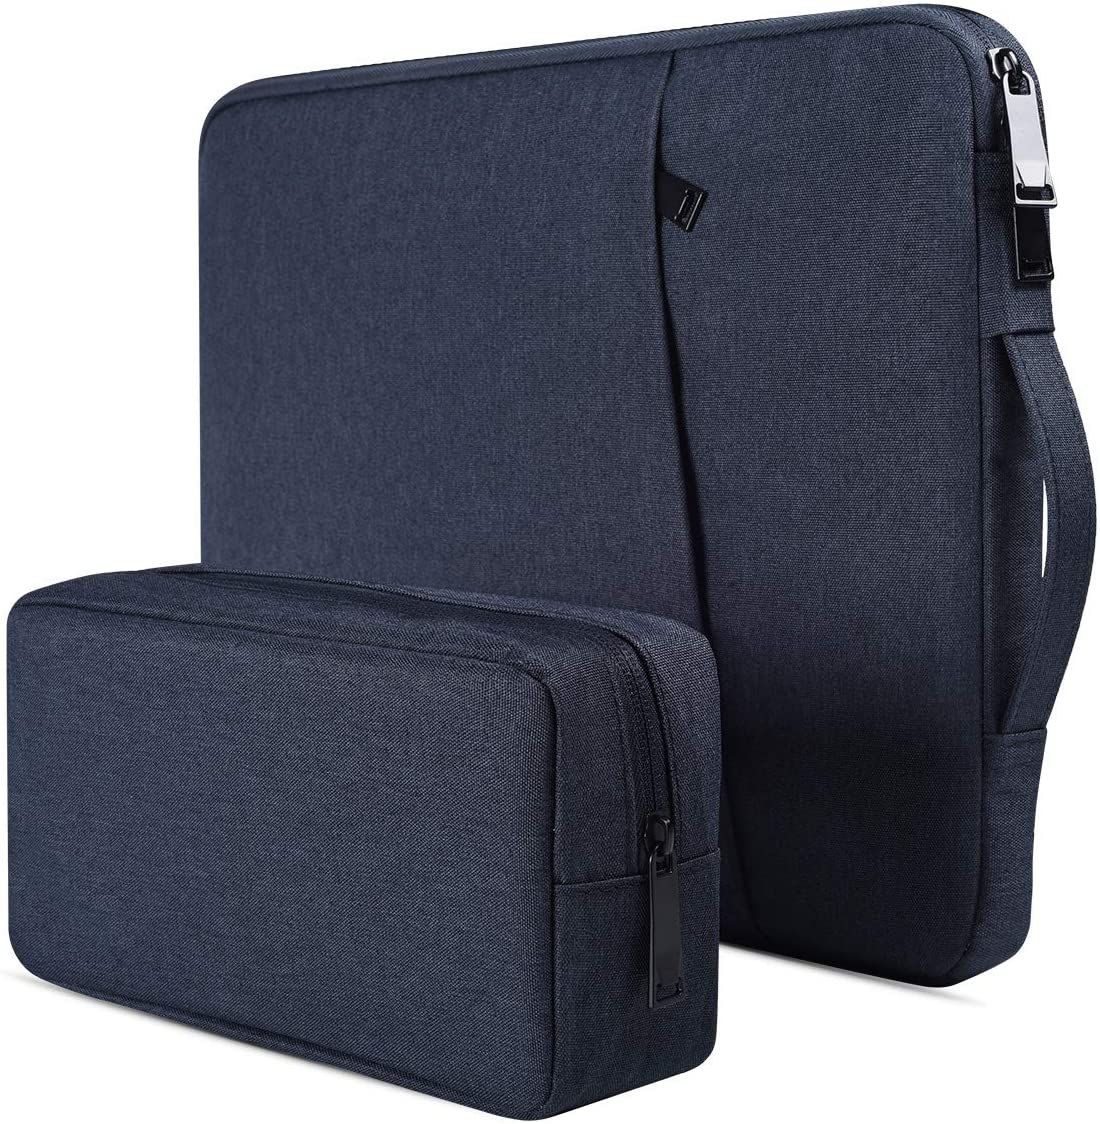 If you plan to carry accessories with your laptop, this sleeve is a different take in that it gives you a separate pouch for accessories. The laptop sleeve itself offers solid protection and water resistance, and the pouch might be an easier way to organize your items.